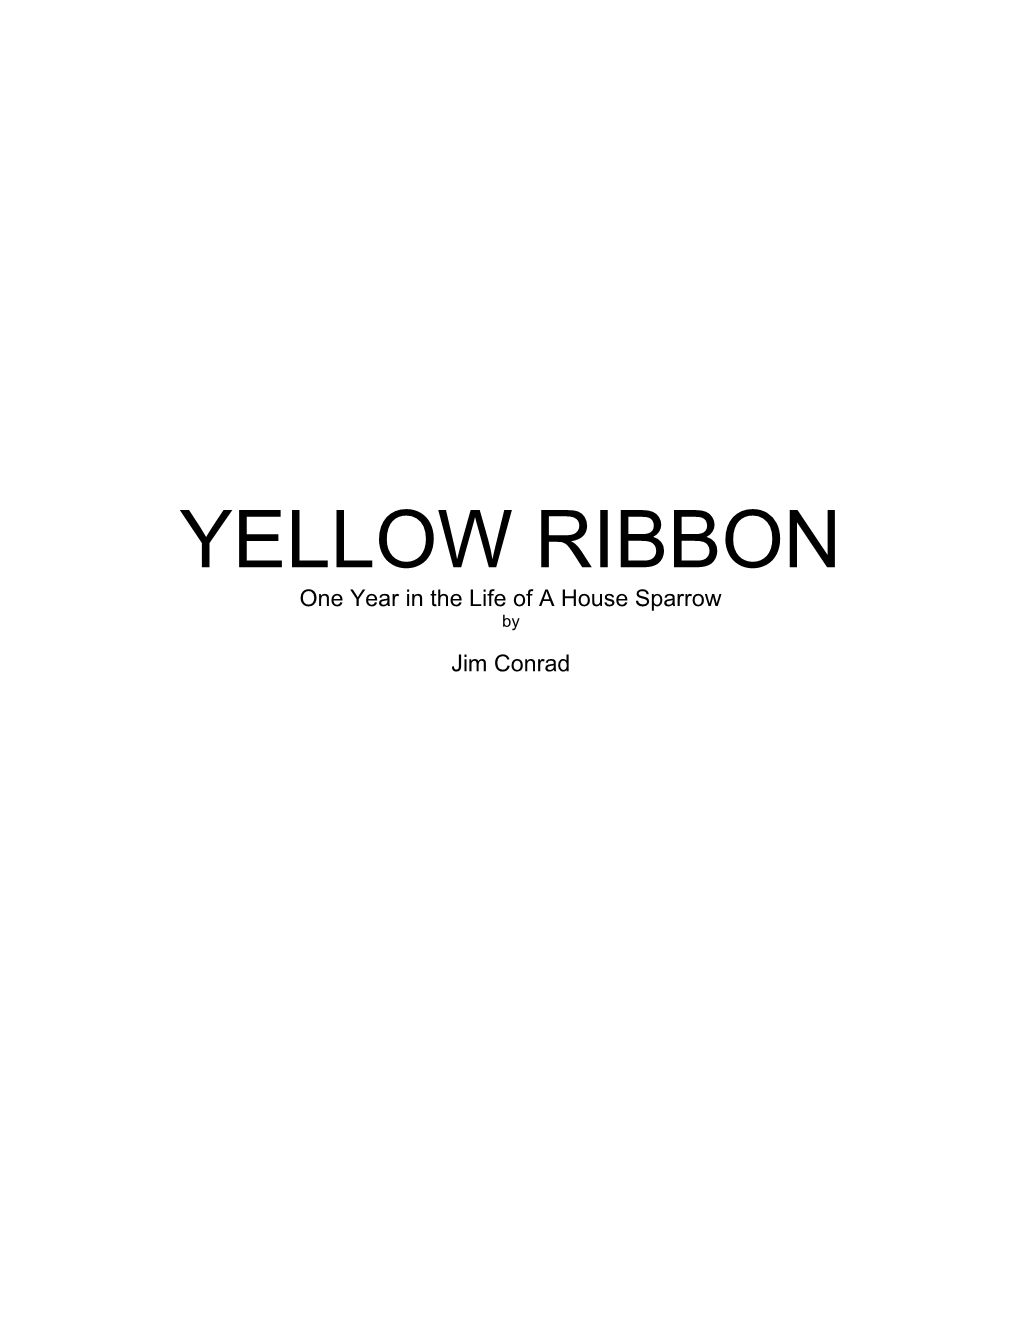 YELLOW RIBBON One Year in the Life of a House Sparrow